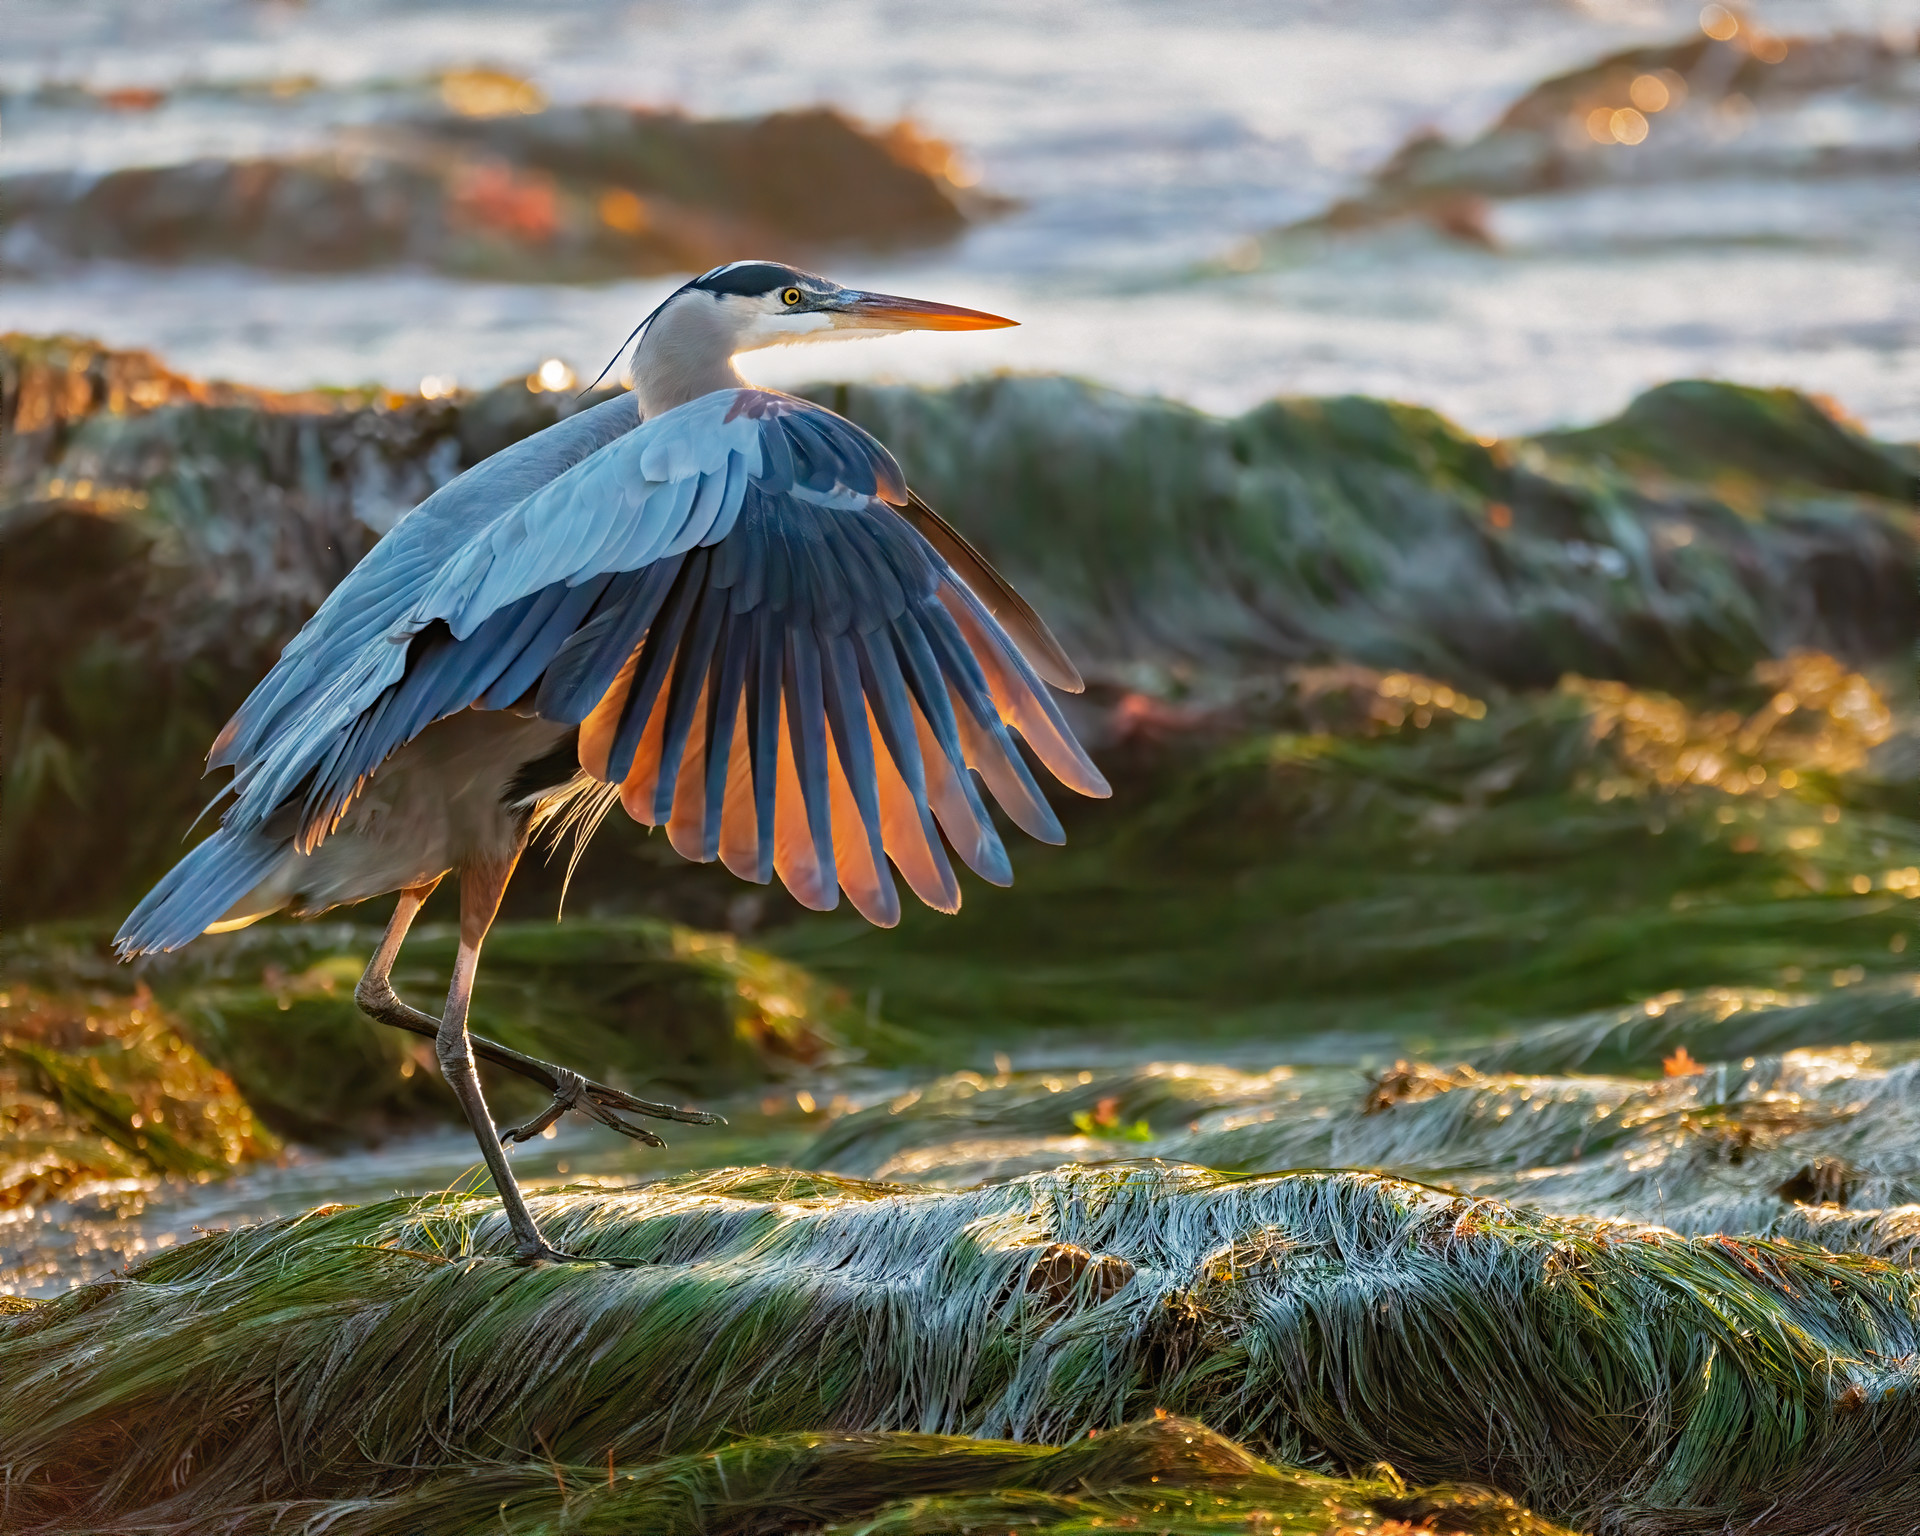 A heron in profile, stands on one foot on top of eelgrass, sunlight shining through its wing feathers